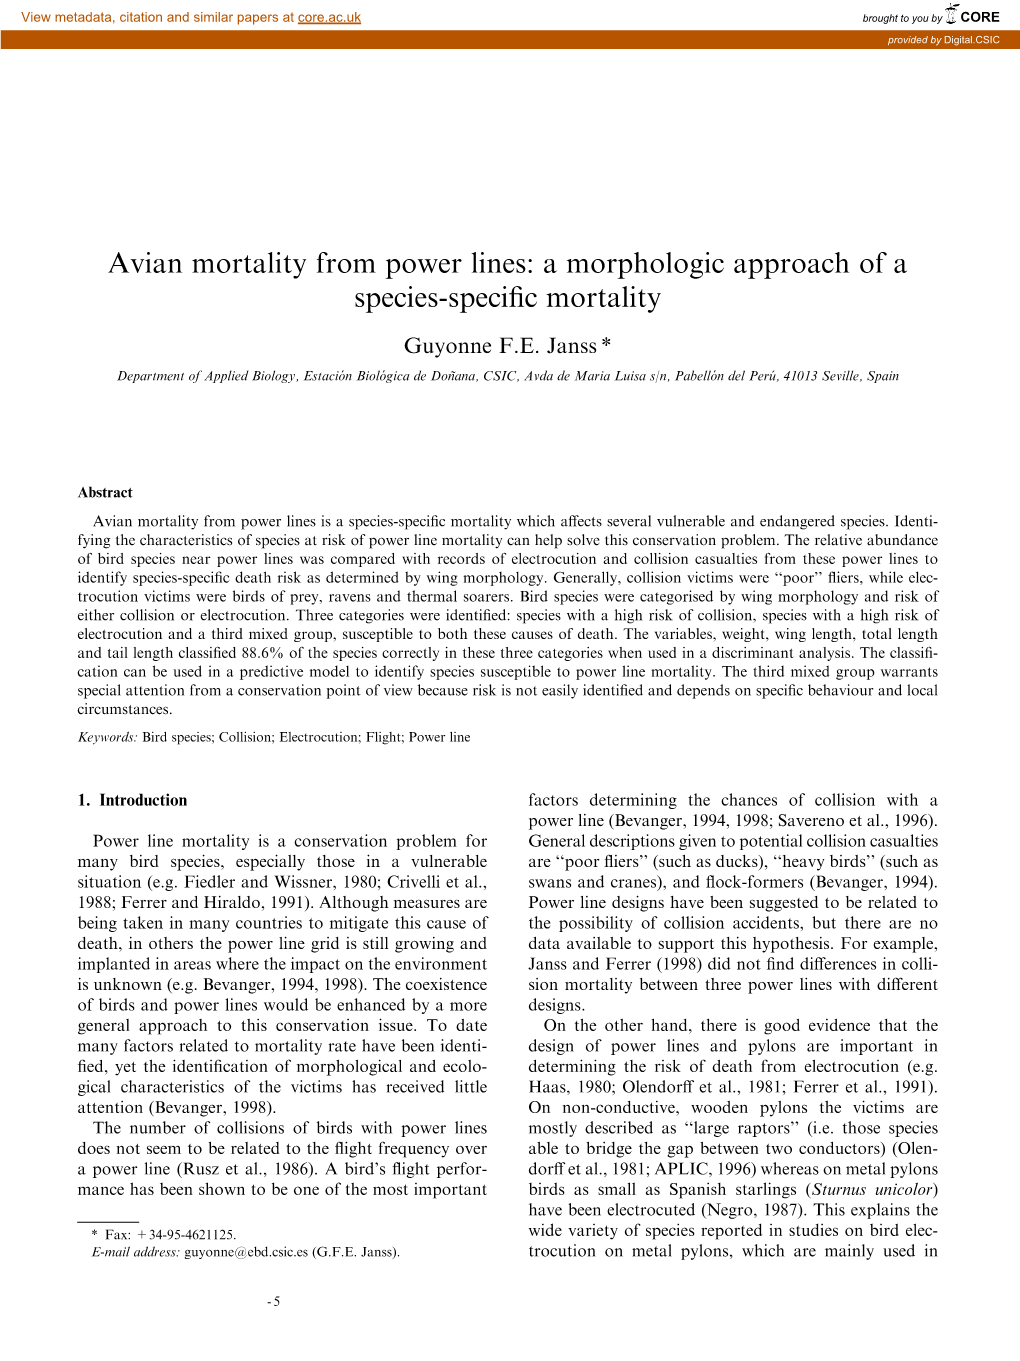 Avian Mortality from Power Lines: a Morphologic Approach of a Species-Speci®C Mortality